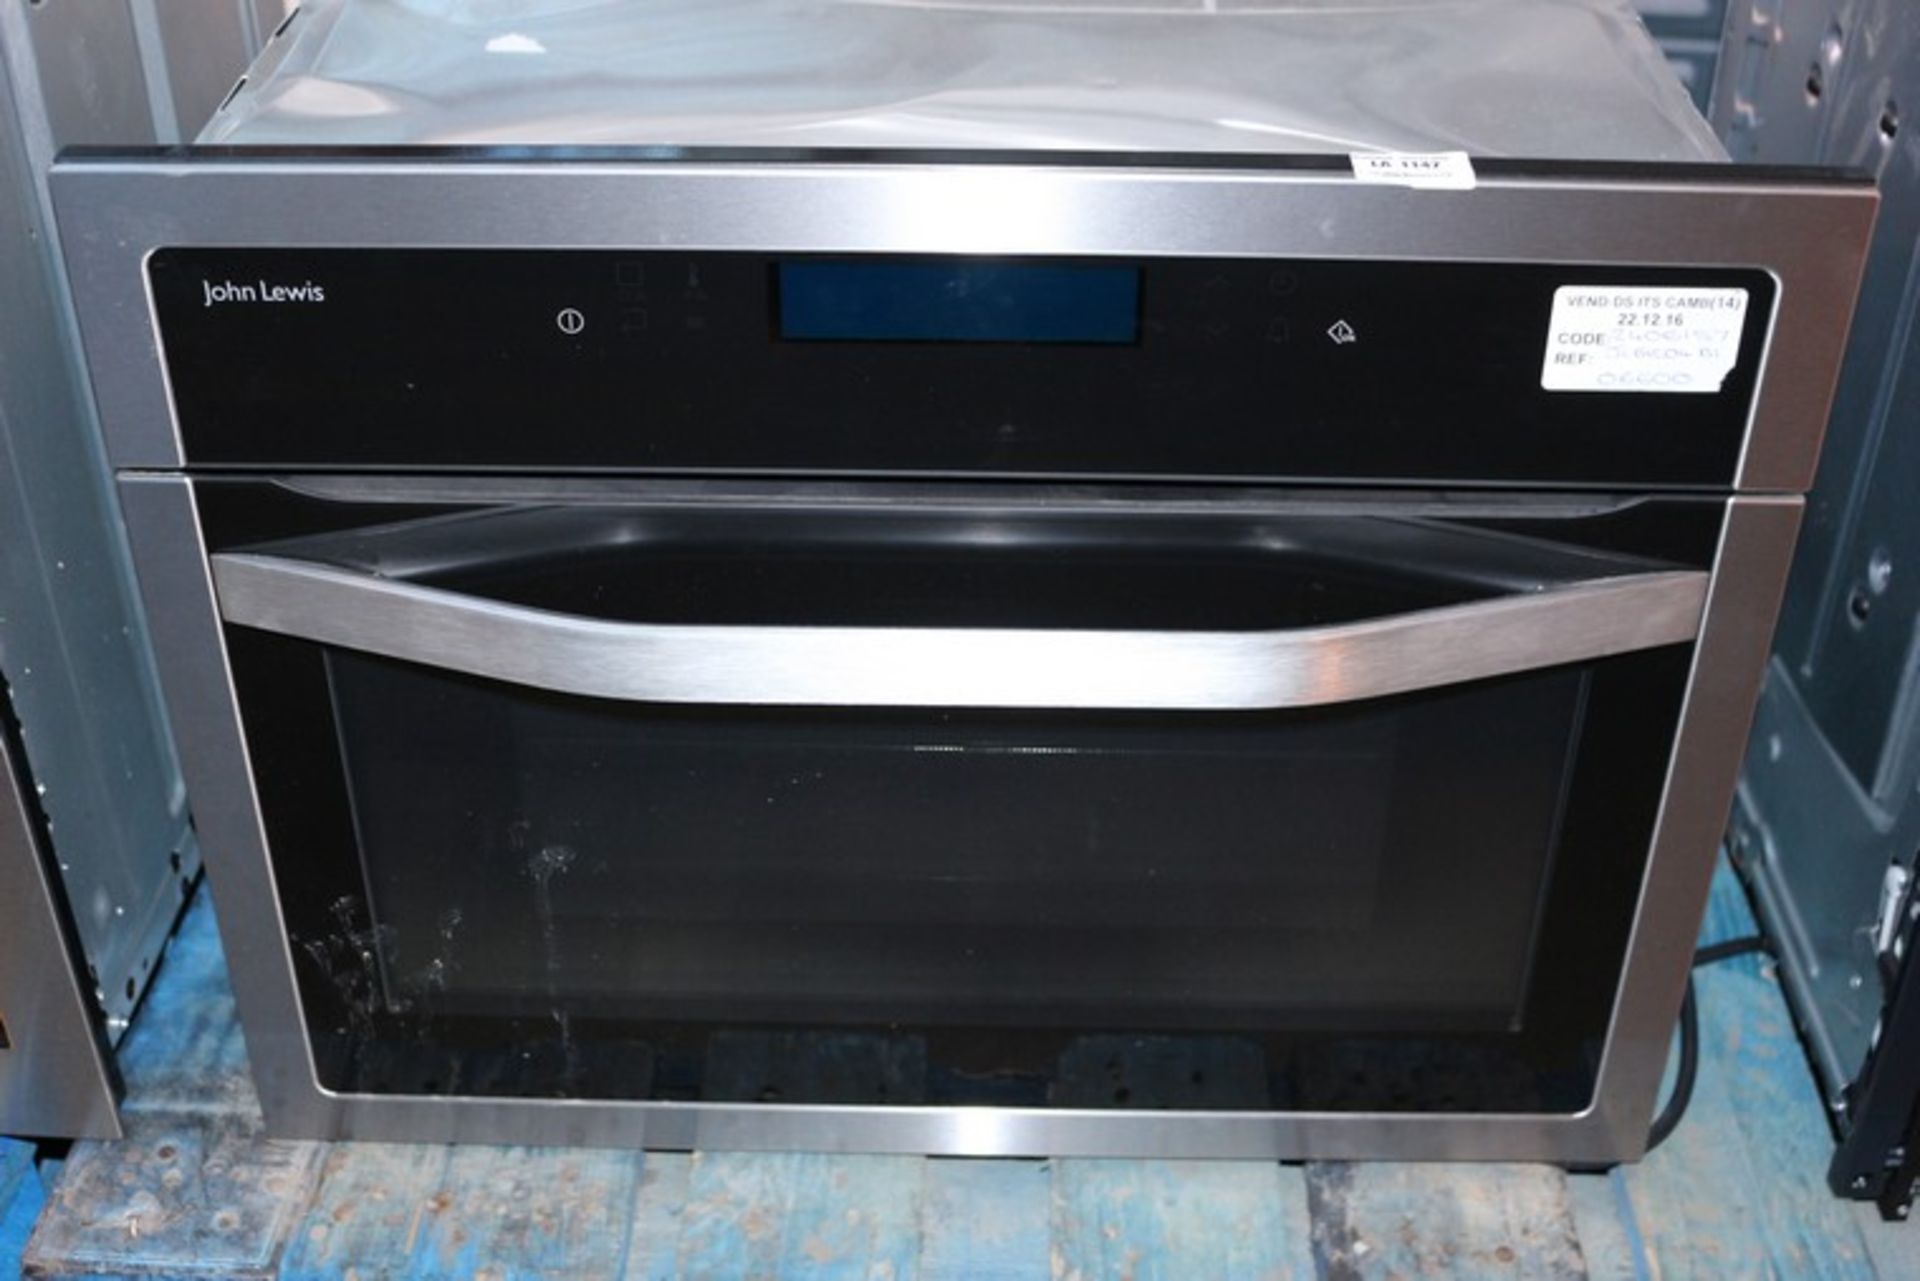 1 x STAINLESS STEEL FULLY INTEGRATED SINGLE ELECTRIC OVEN (24061507) RRP £660 (22.12.16) *PLEASE